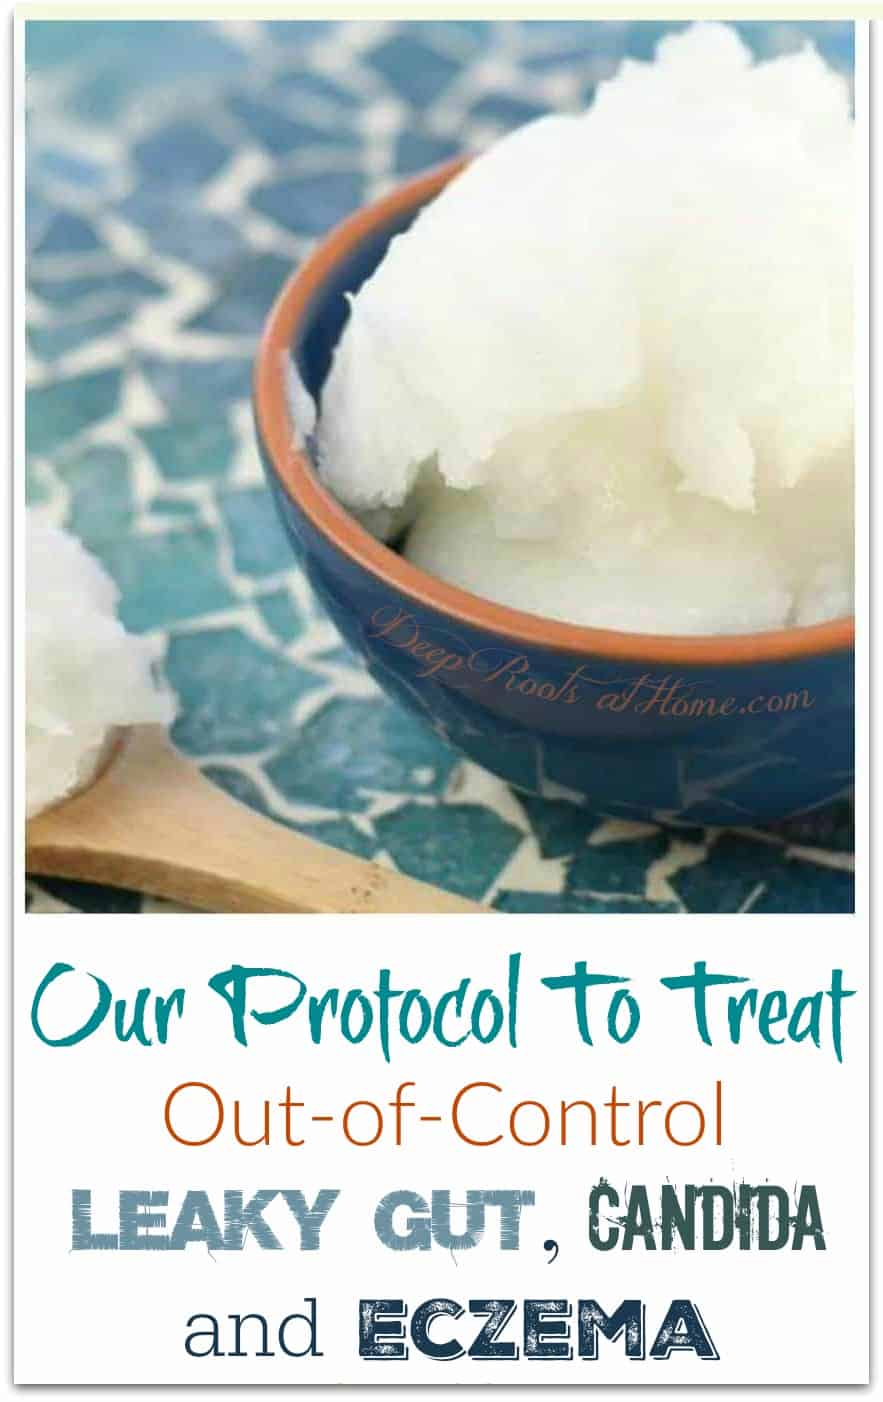 Our Protocol To Treat Out-of-Control Leaky Gut, Candida & Eczema. coconut oil in a bowl